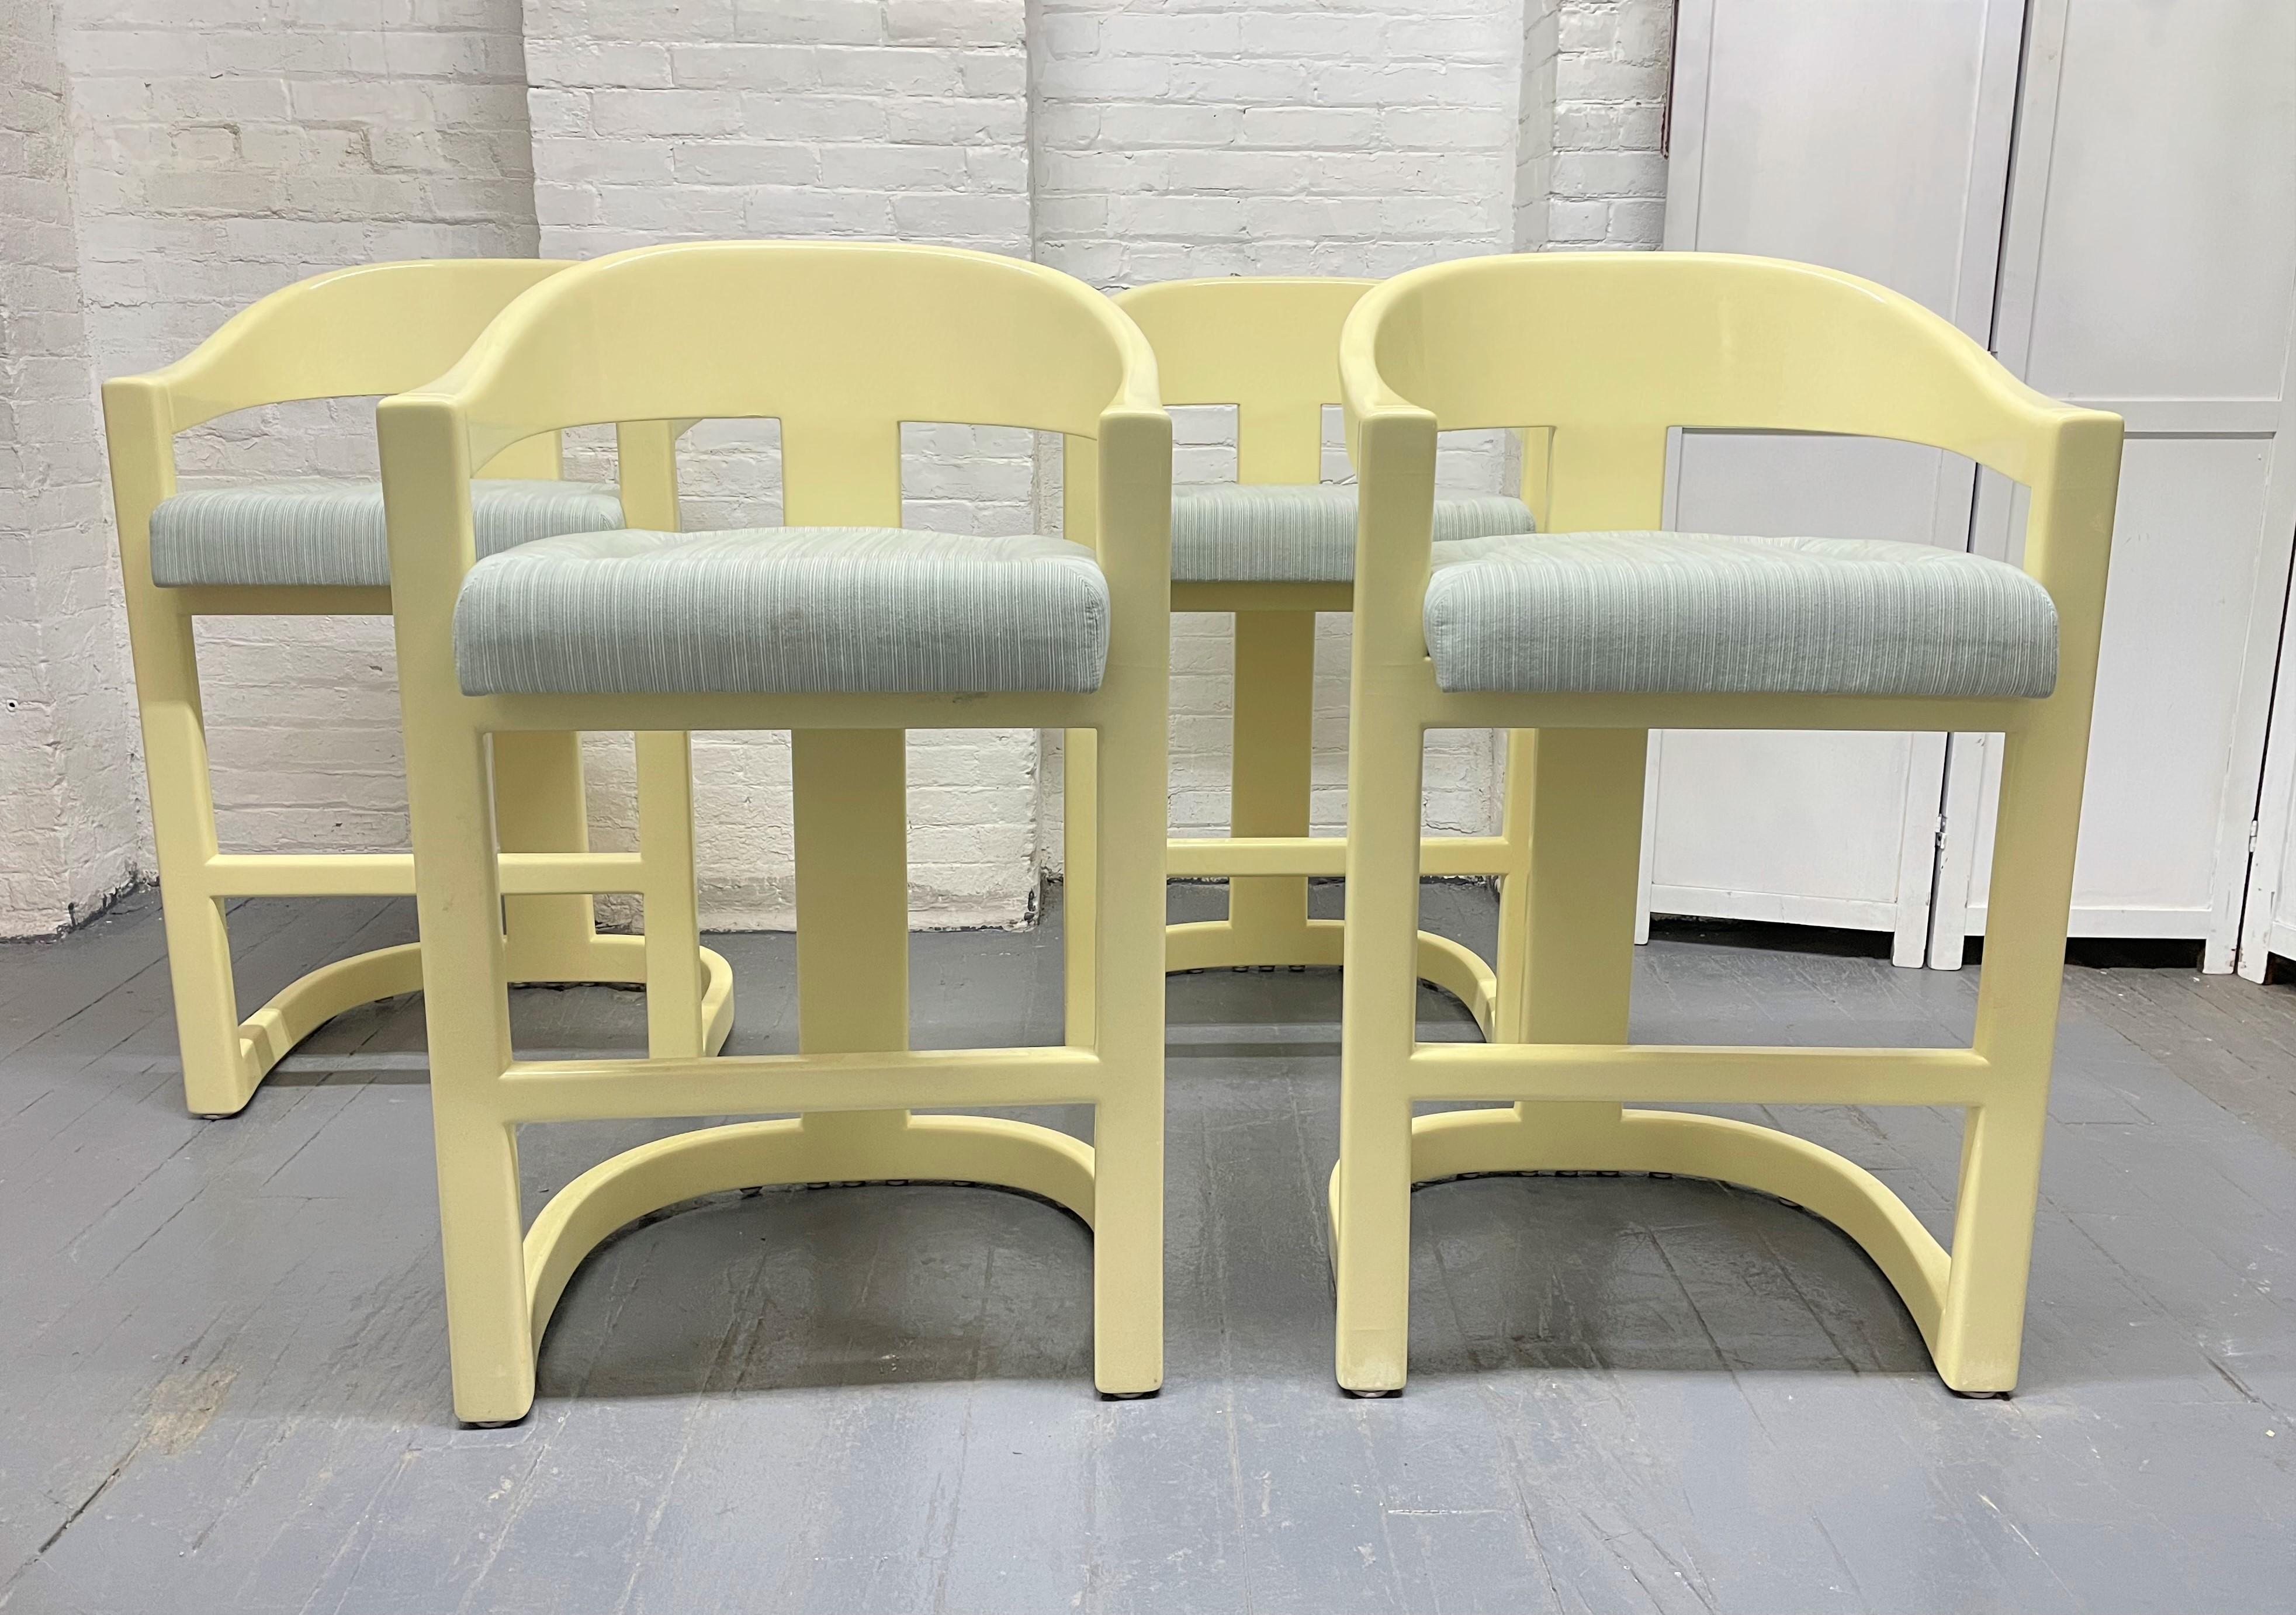 Set of 4 Karl Springer Onassis bar stools. The stools' frame is lacquered wood with fabric covered cushioned seats. The stools have a nice, lacquered finish.